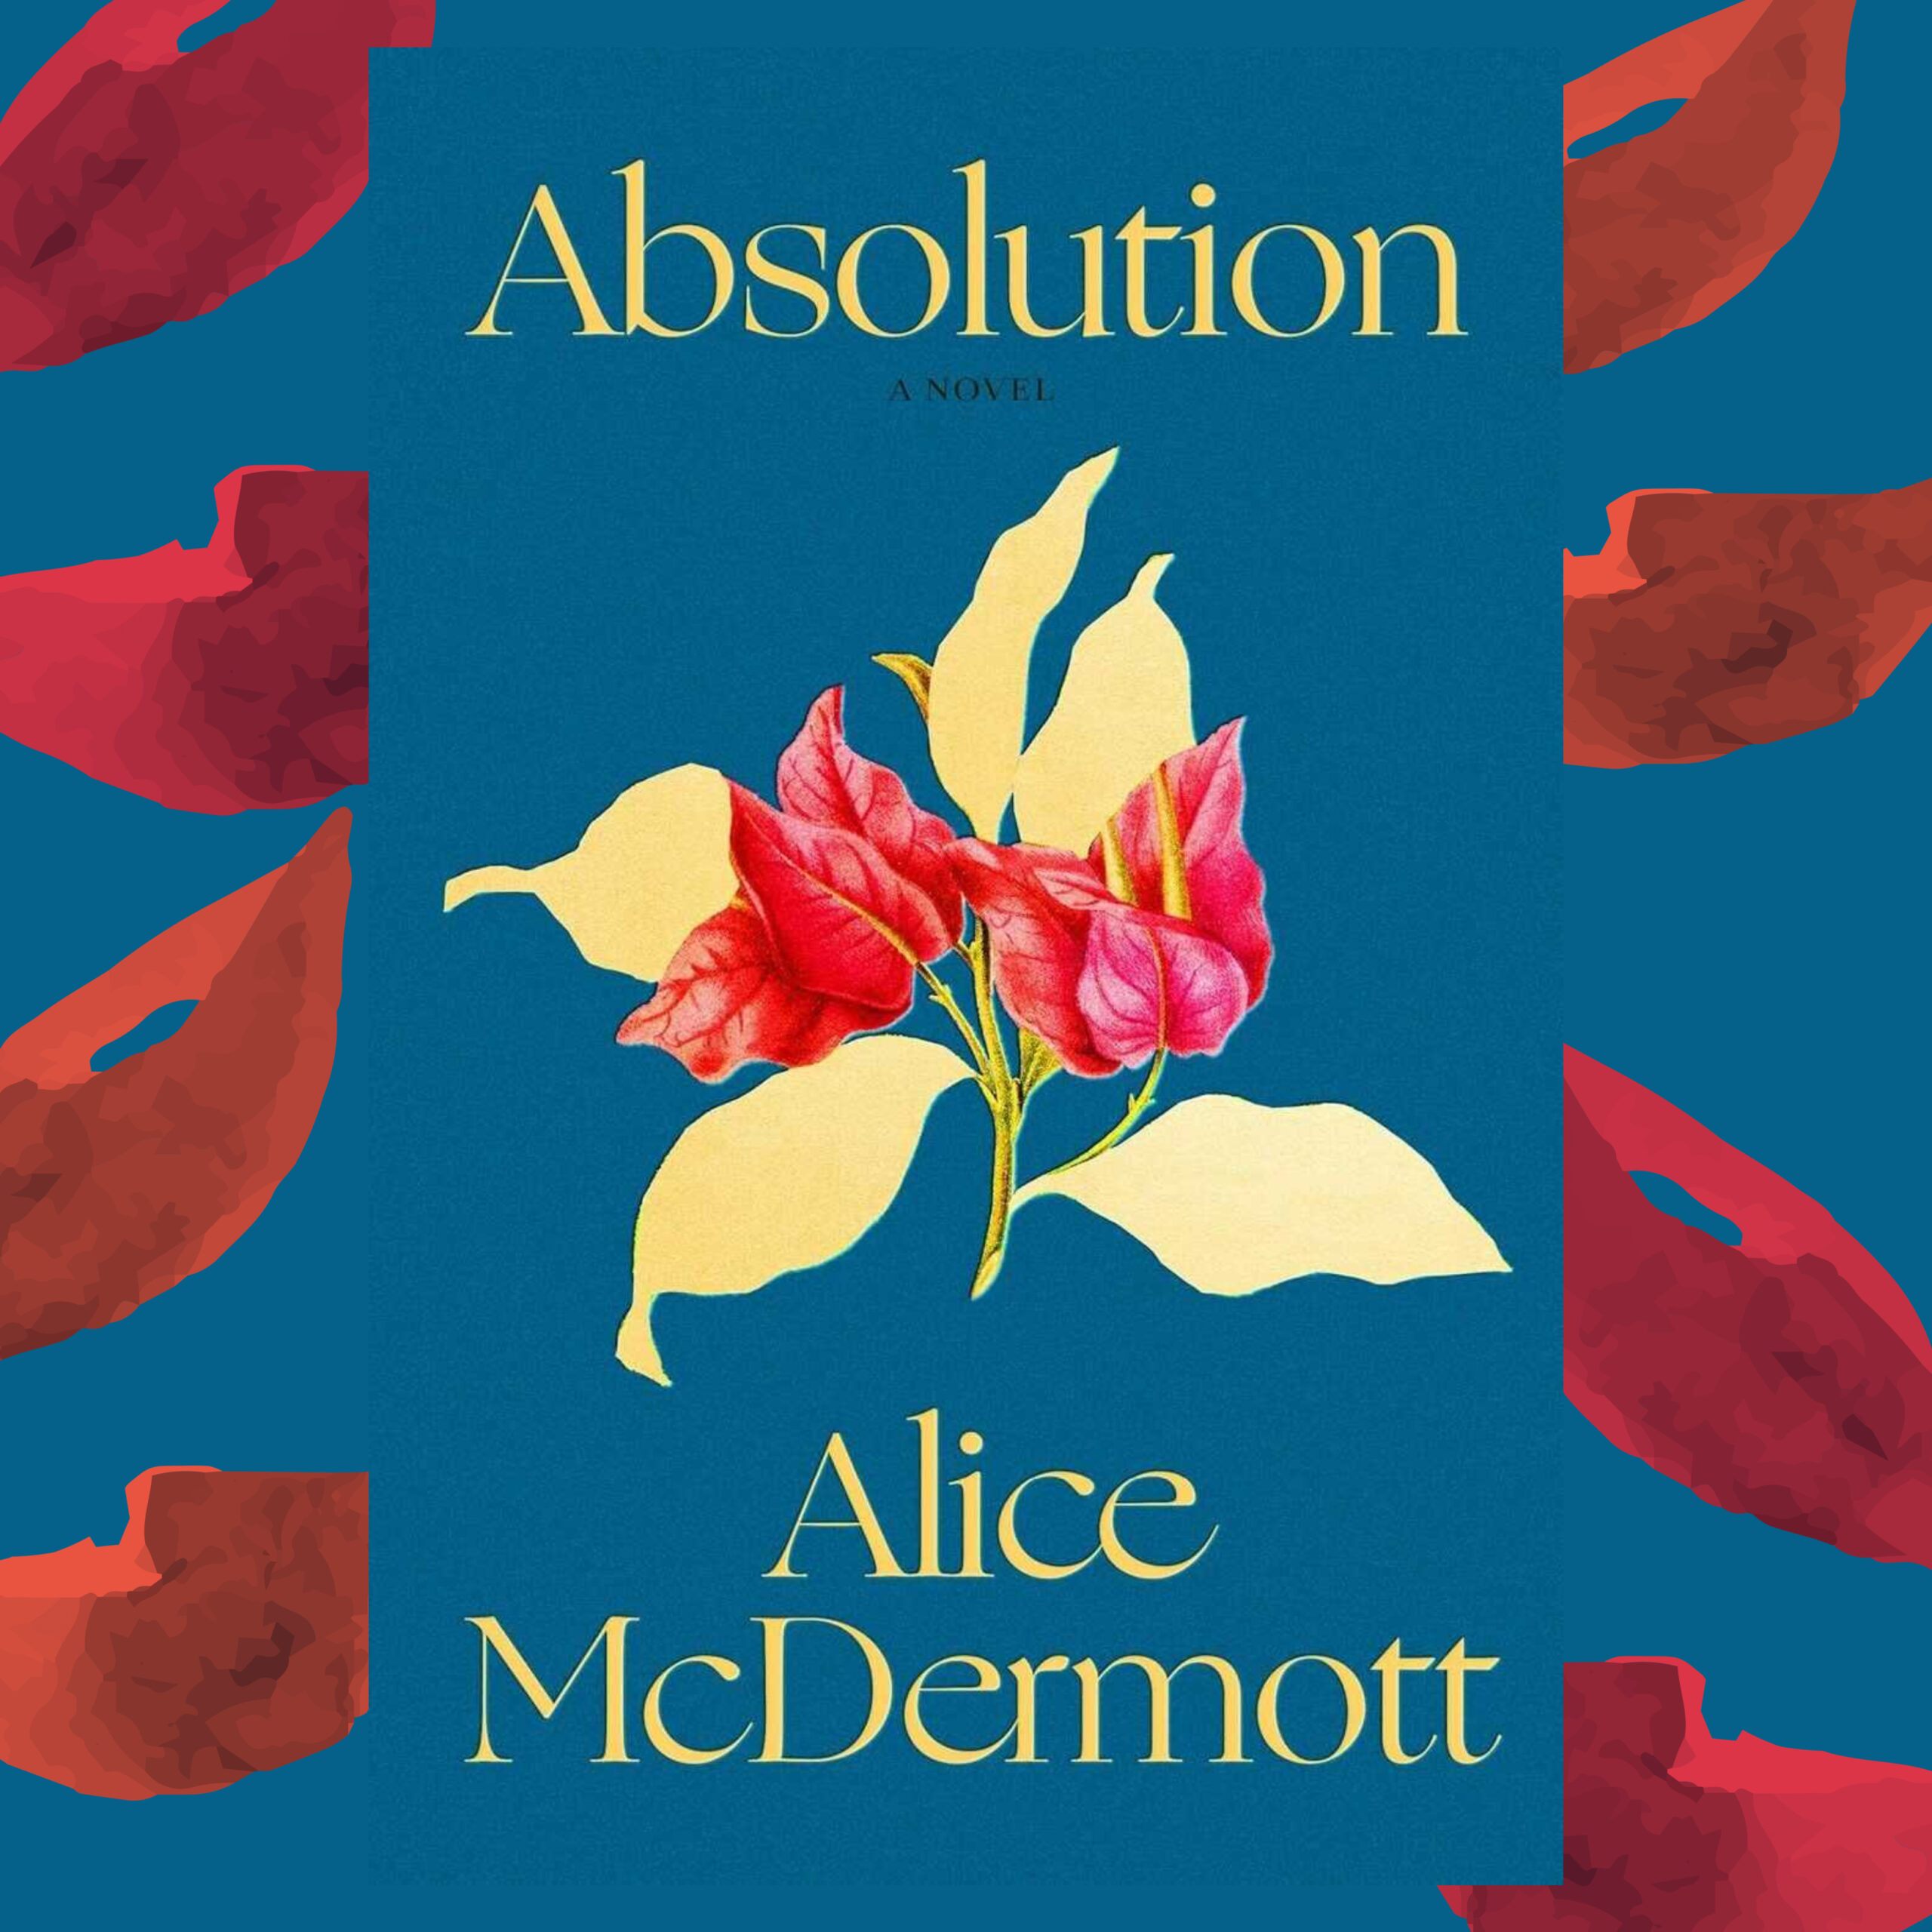 The Book Show - Alice McDermott - Absolution